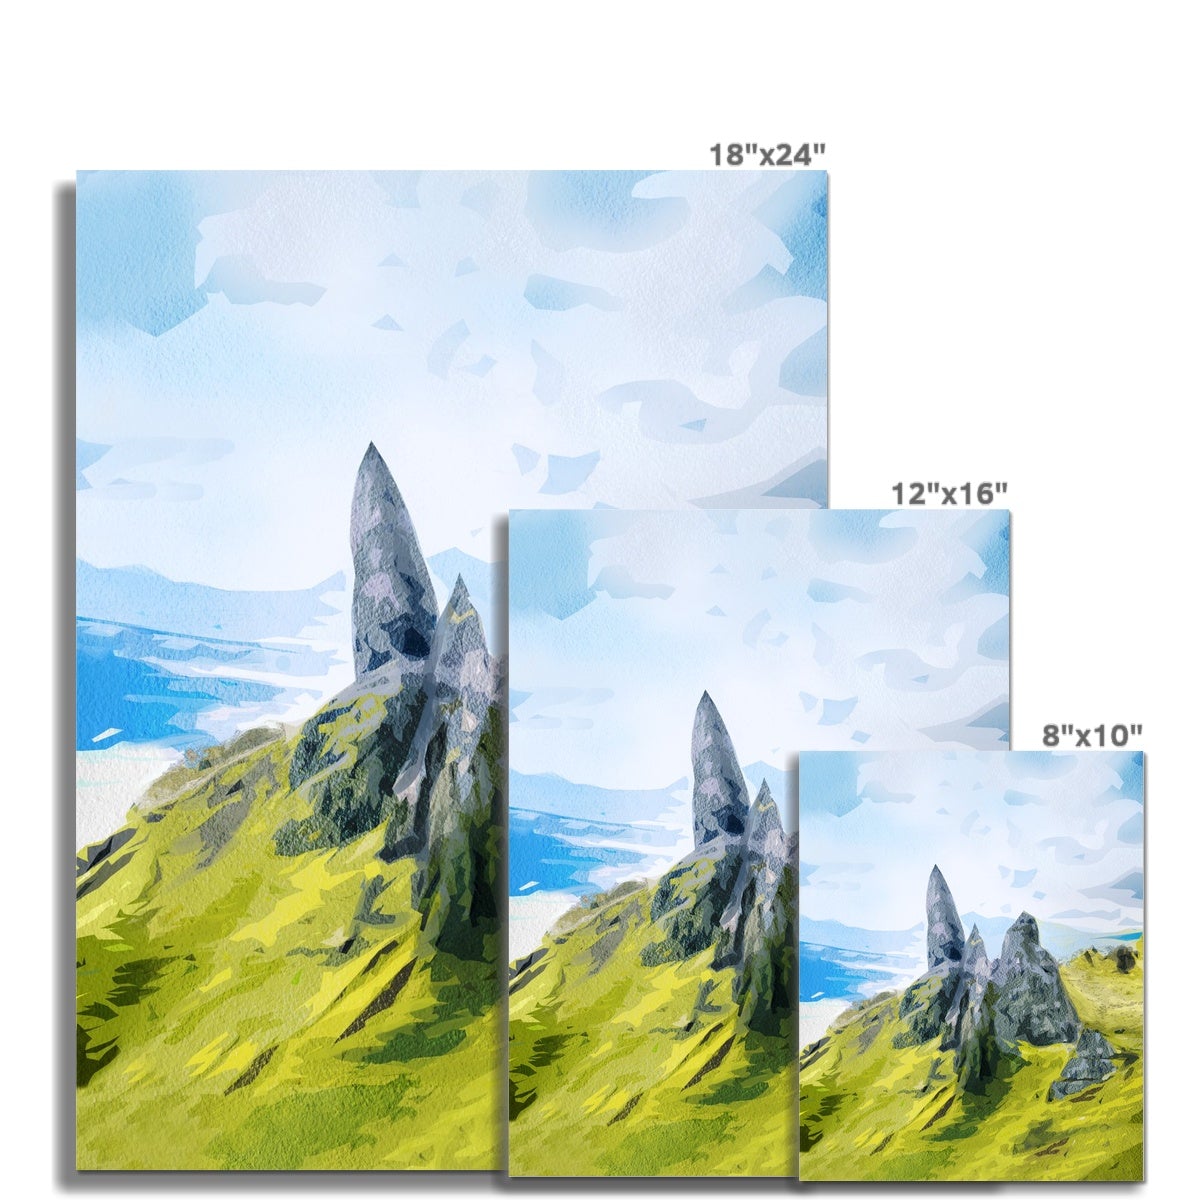 The Old Man of Storr - Watercolor Art